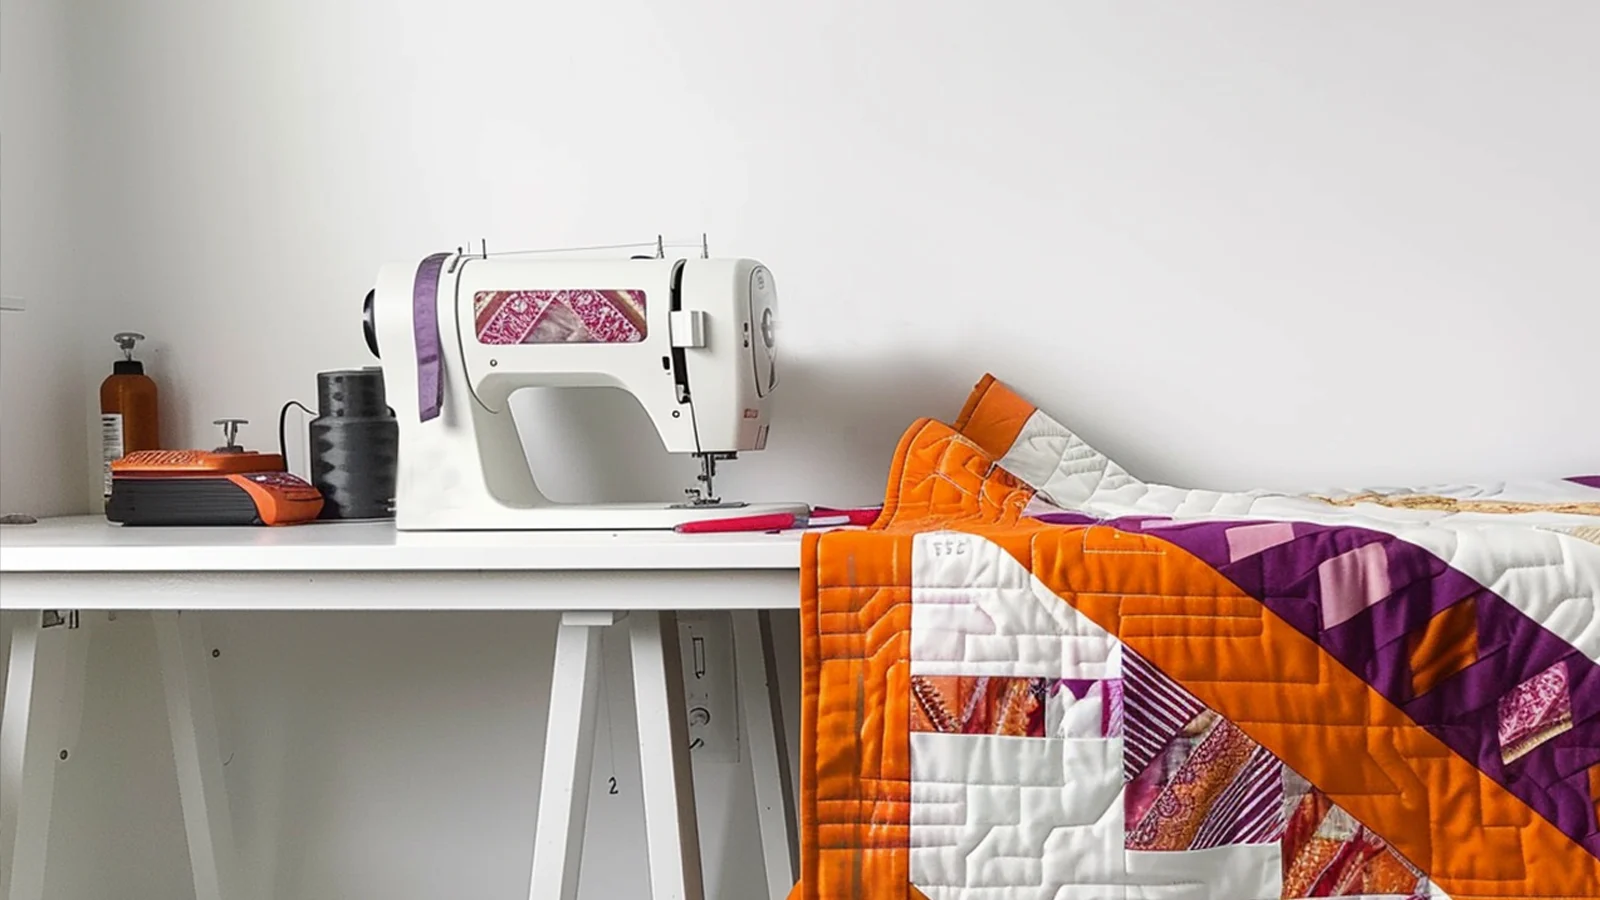 What Tension Should I Use for Quilting on a Sewing Machine?